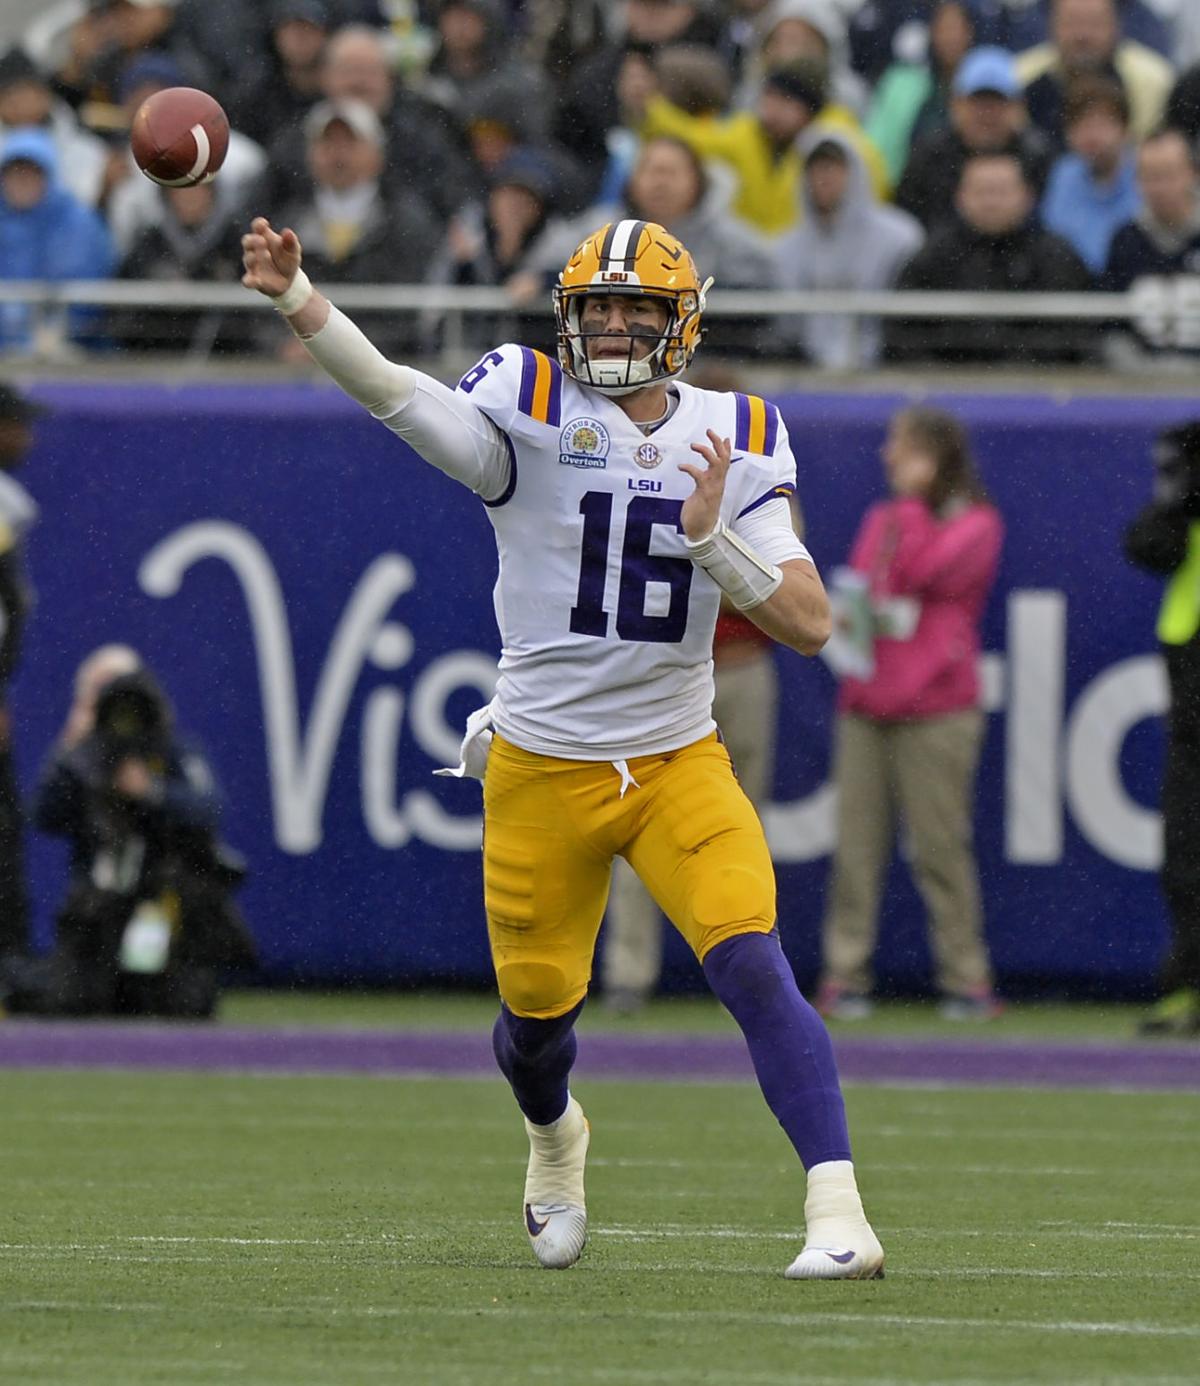 LSUs new starting QB Danny Etling ridiculous at Madden 